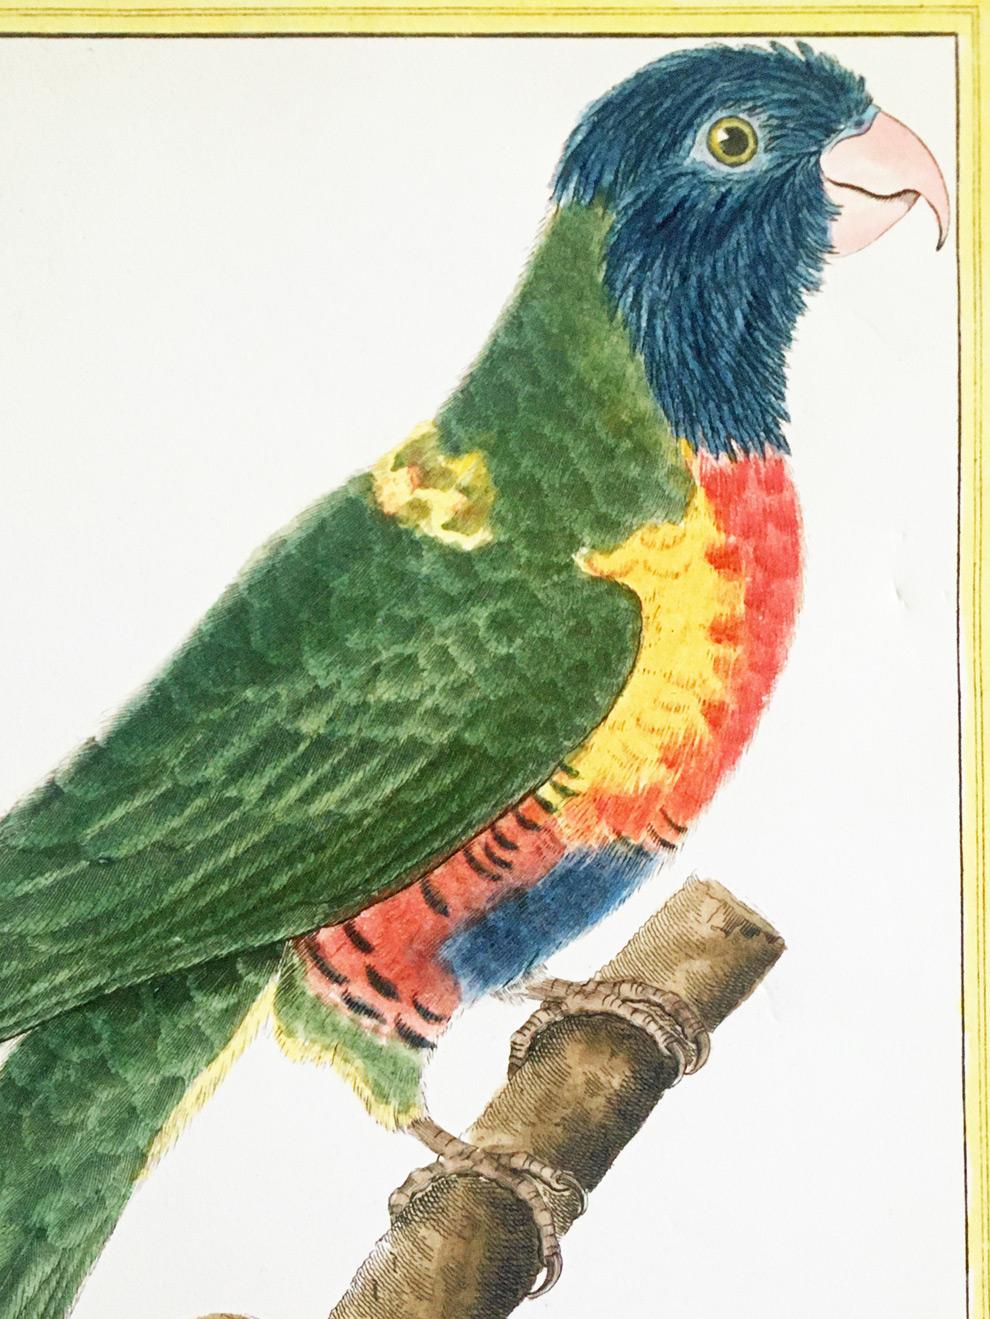 A large hand-colored copper plate engraving on hand woven paper of a colorful parrot perched on a tree stump by Francois Nicolas Martinet, French, (b.1731-c.1804). It is signed by the artist in the bottom left and numbered 743 in the top left corner